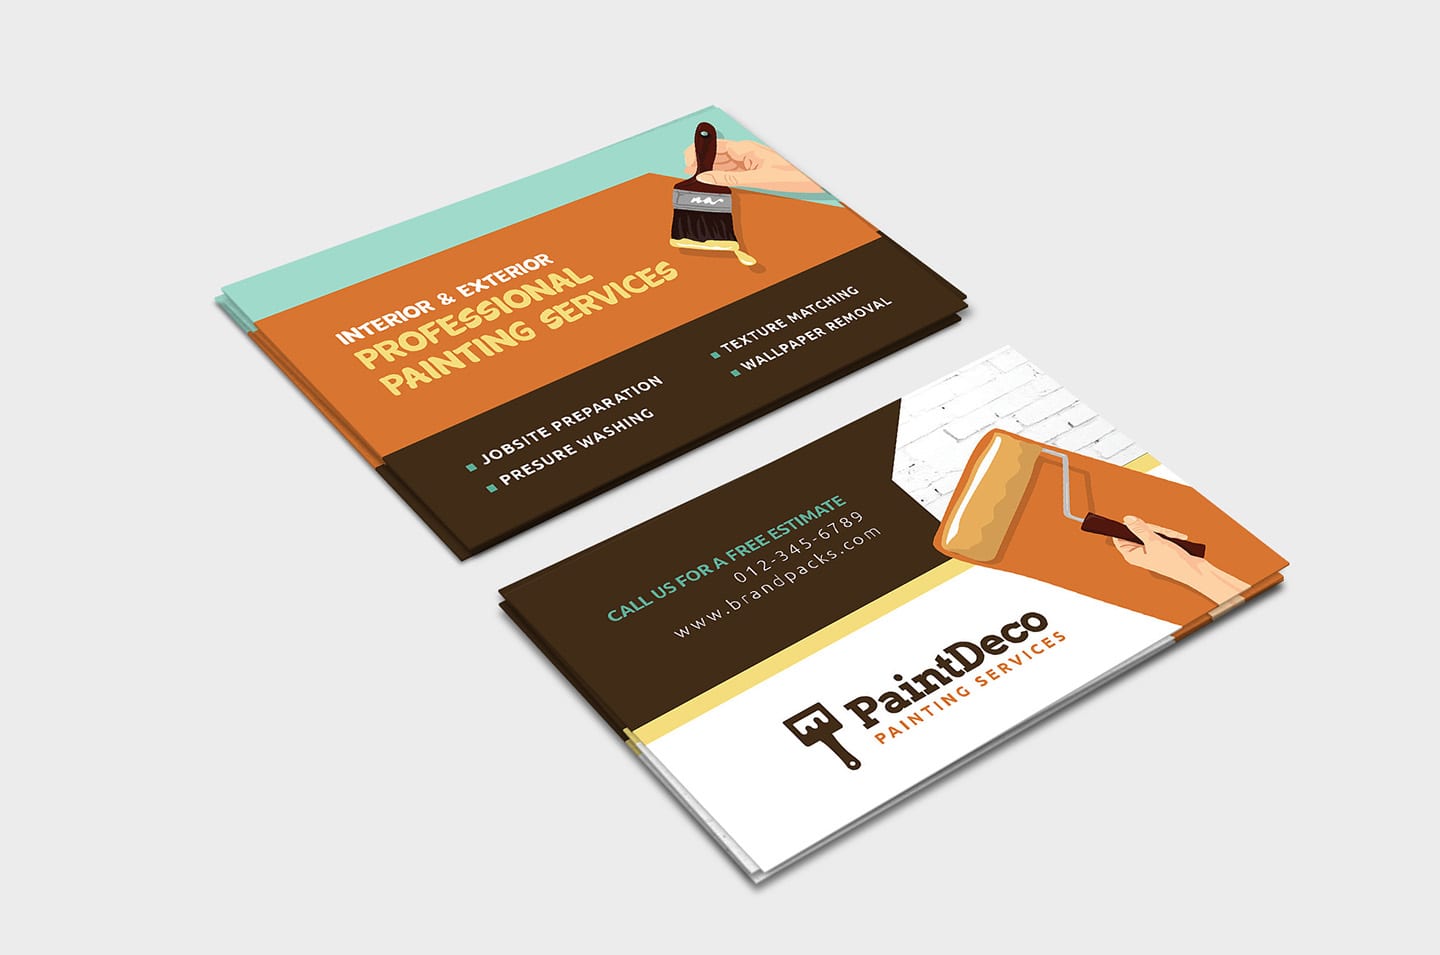 Painter & Decorator Business Card Template in PSD, Ai & Vector Throughout Business Cards For Teachers Templates Free